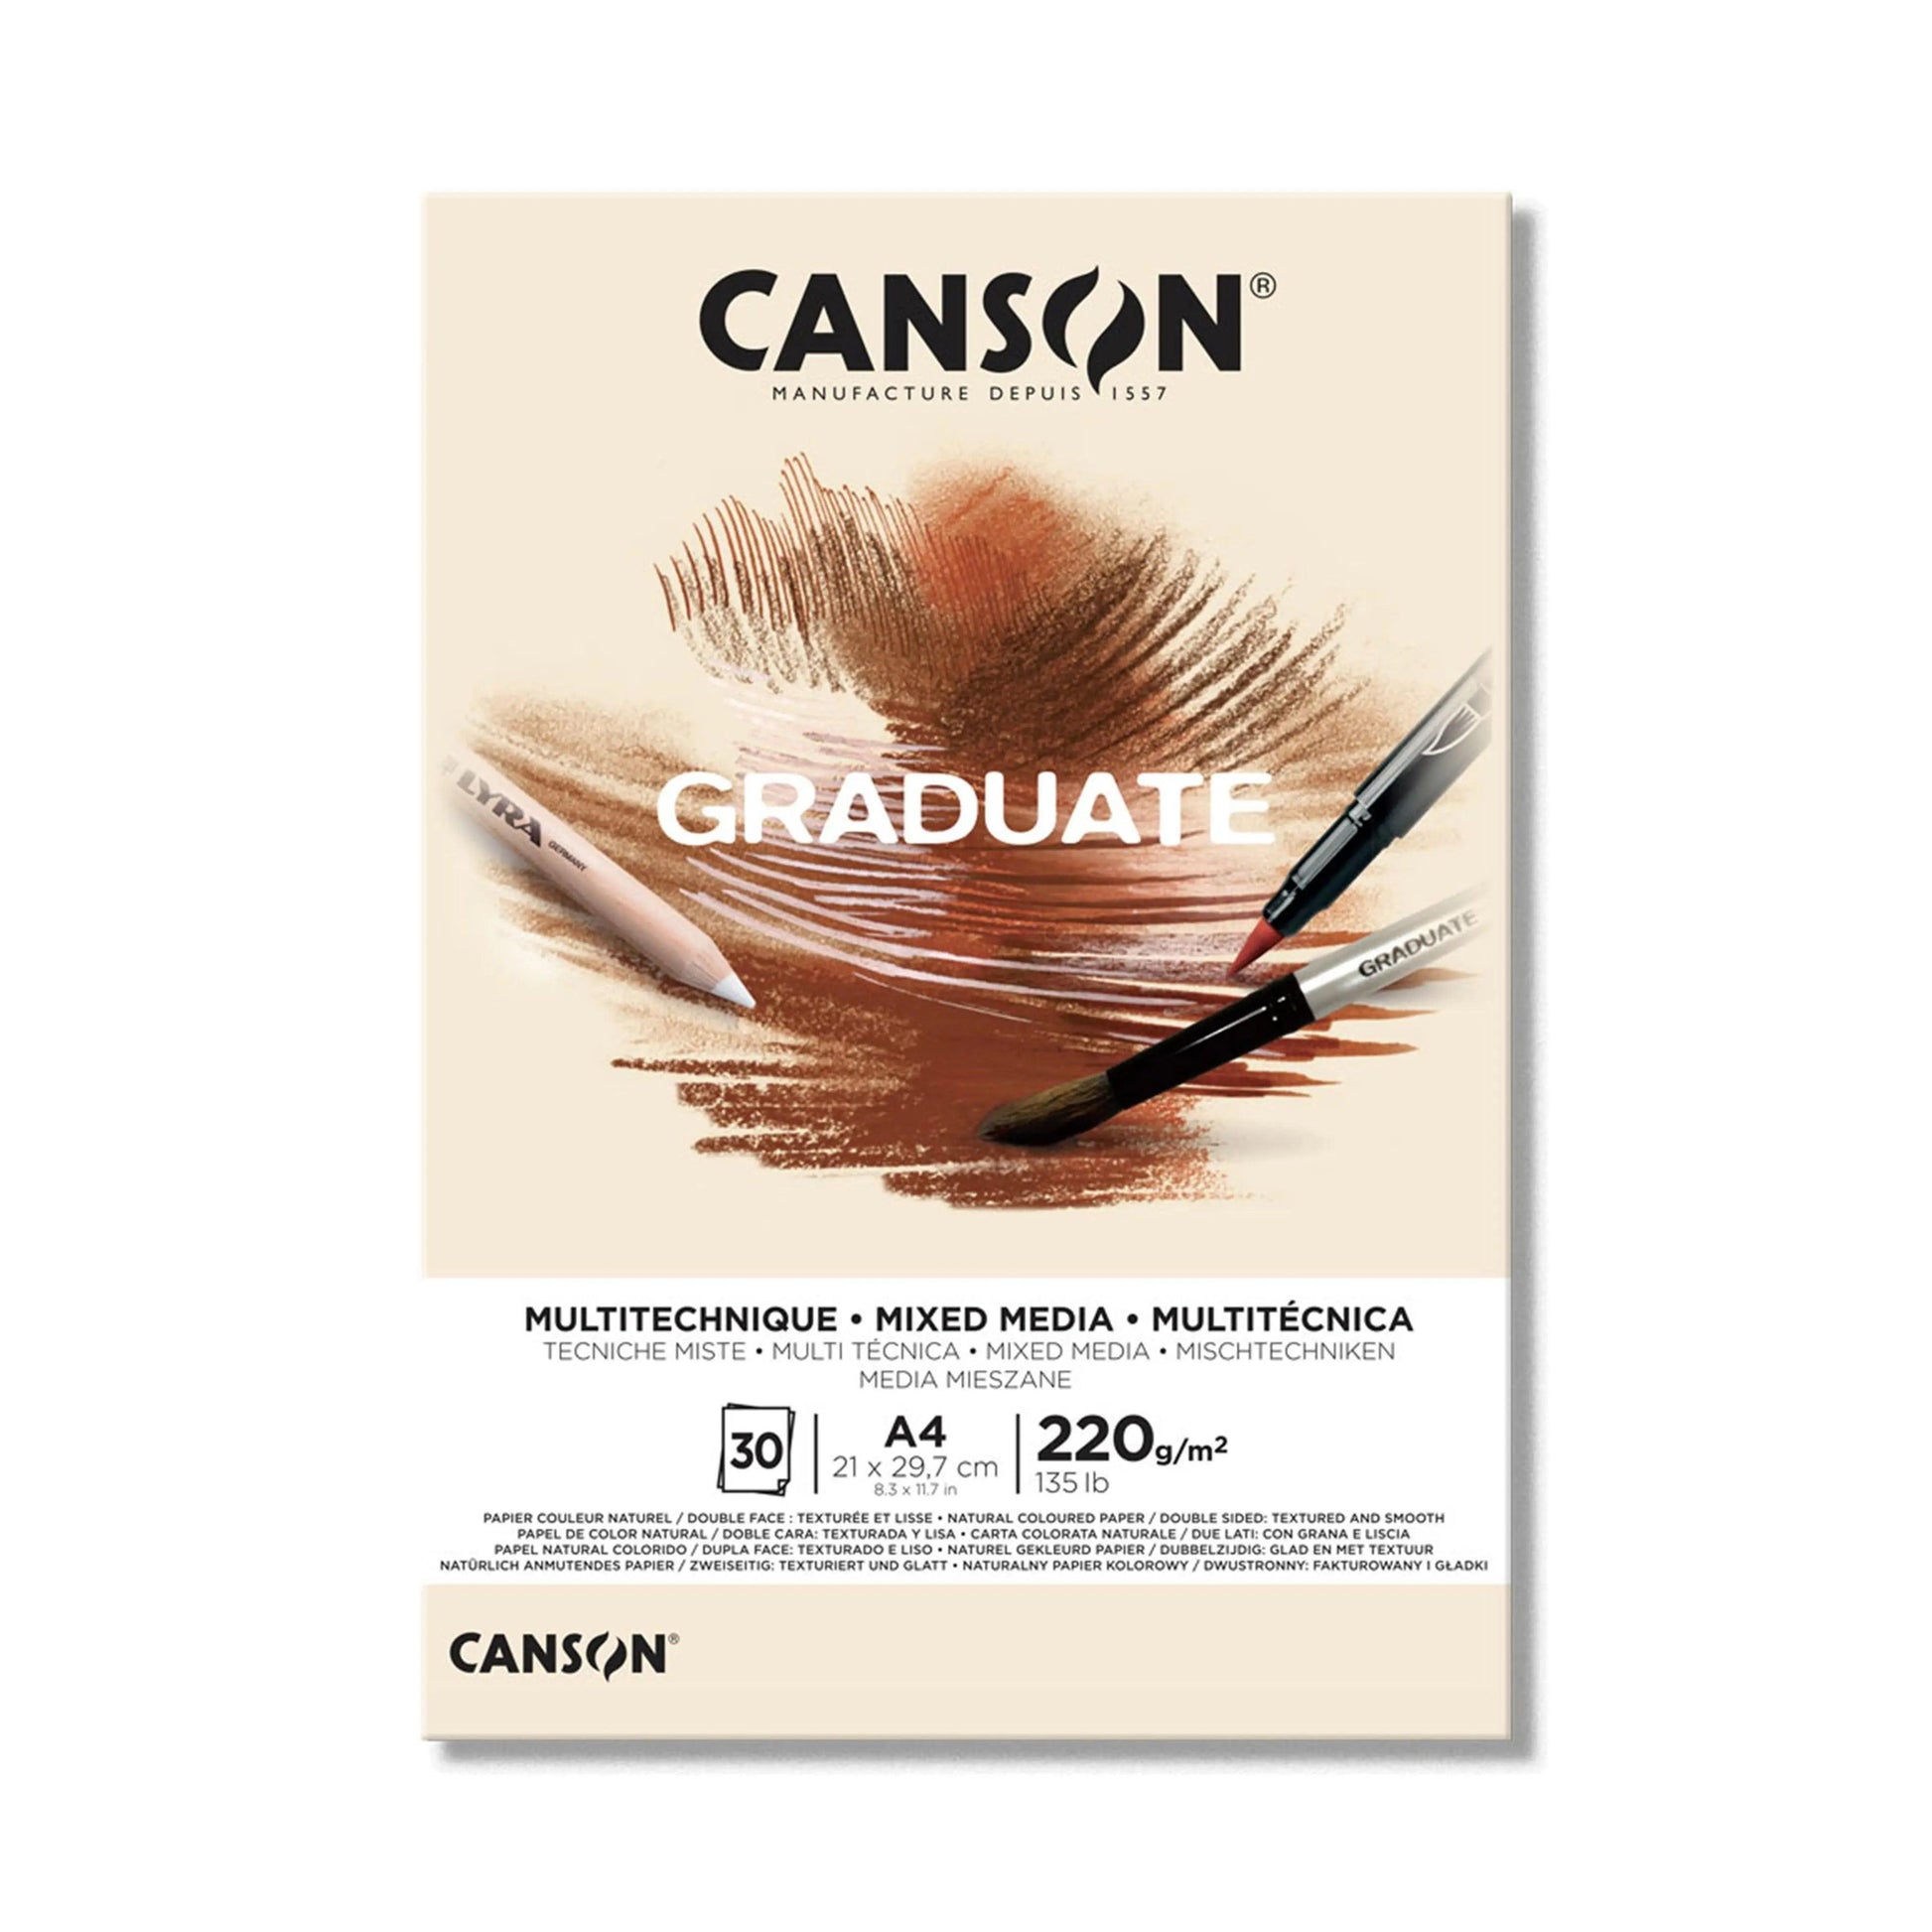 Canson Graduate Mixed Media Natural 220gsm The Stationers